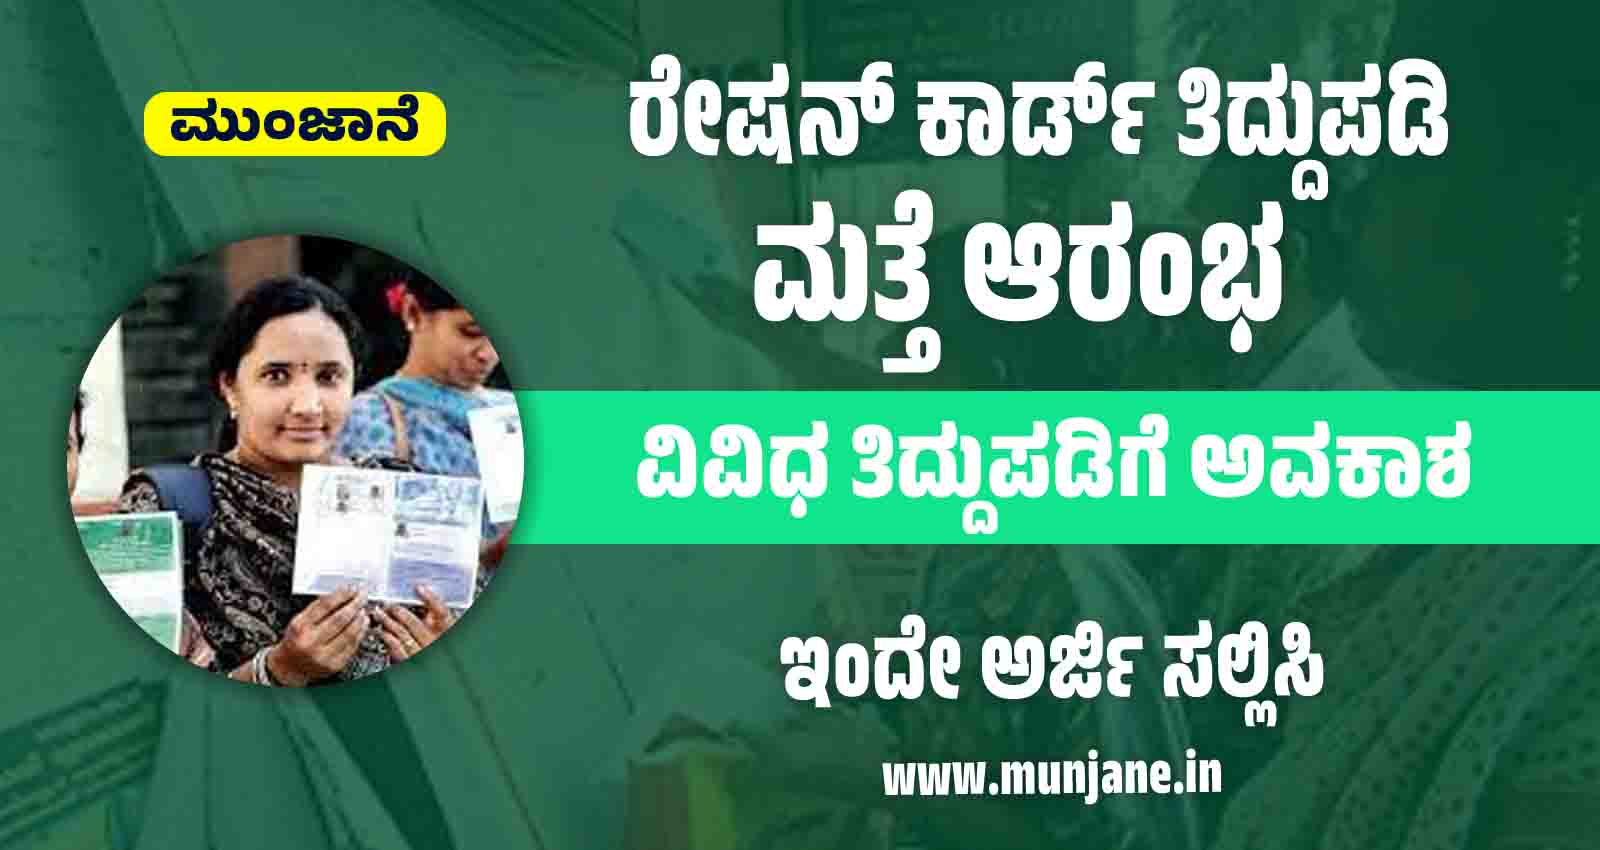 ration card correction started